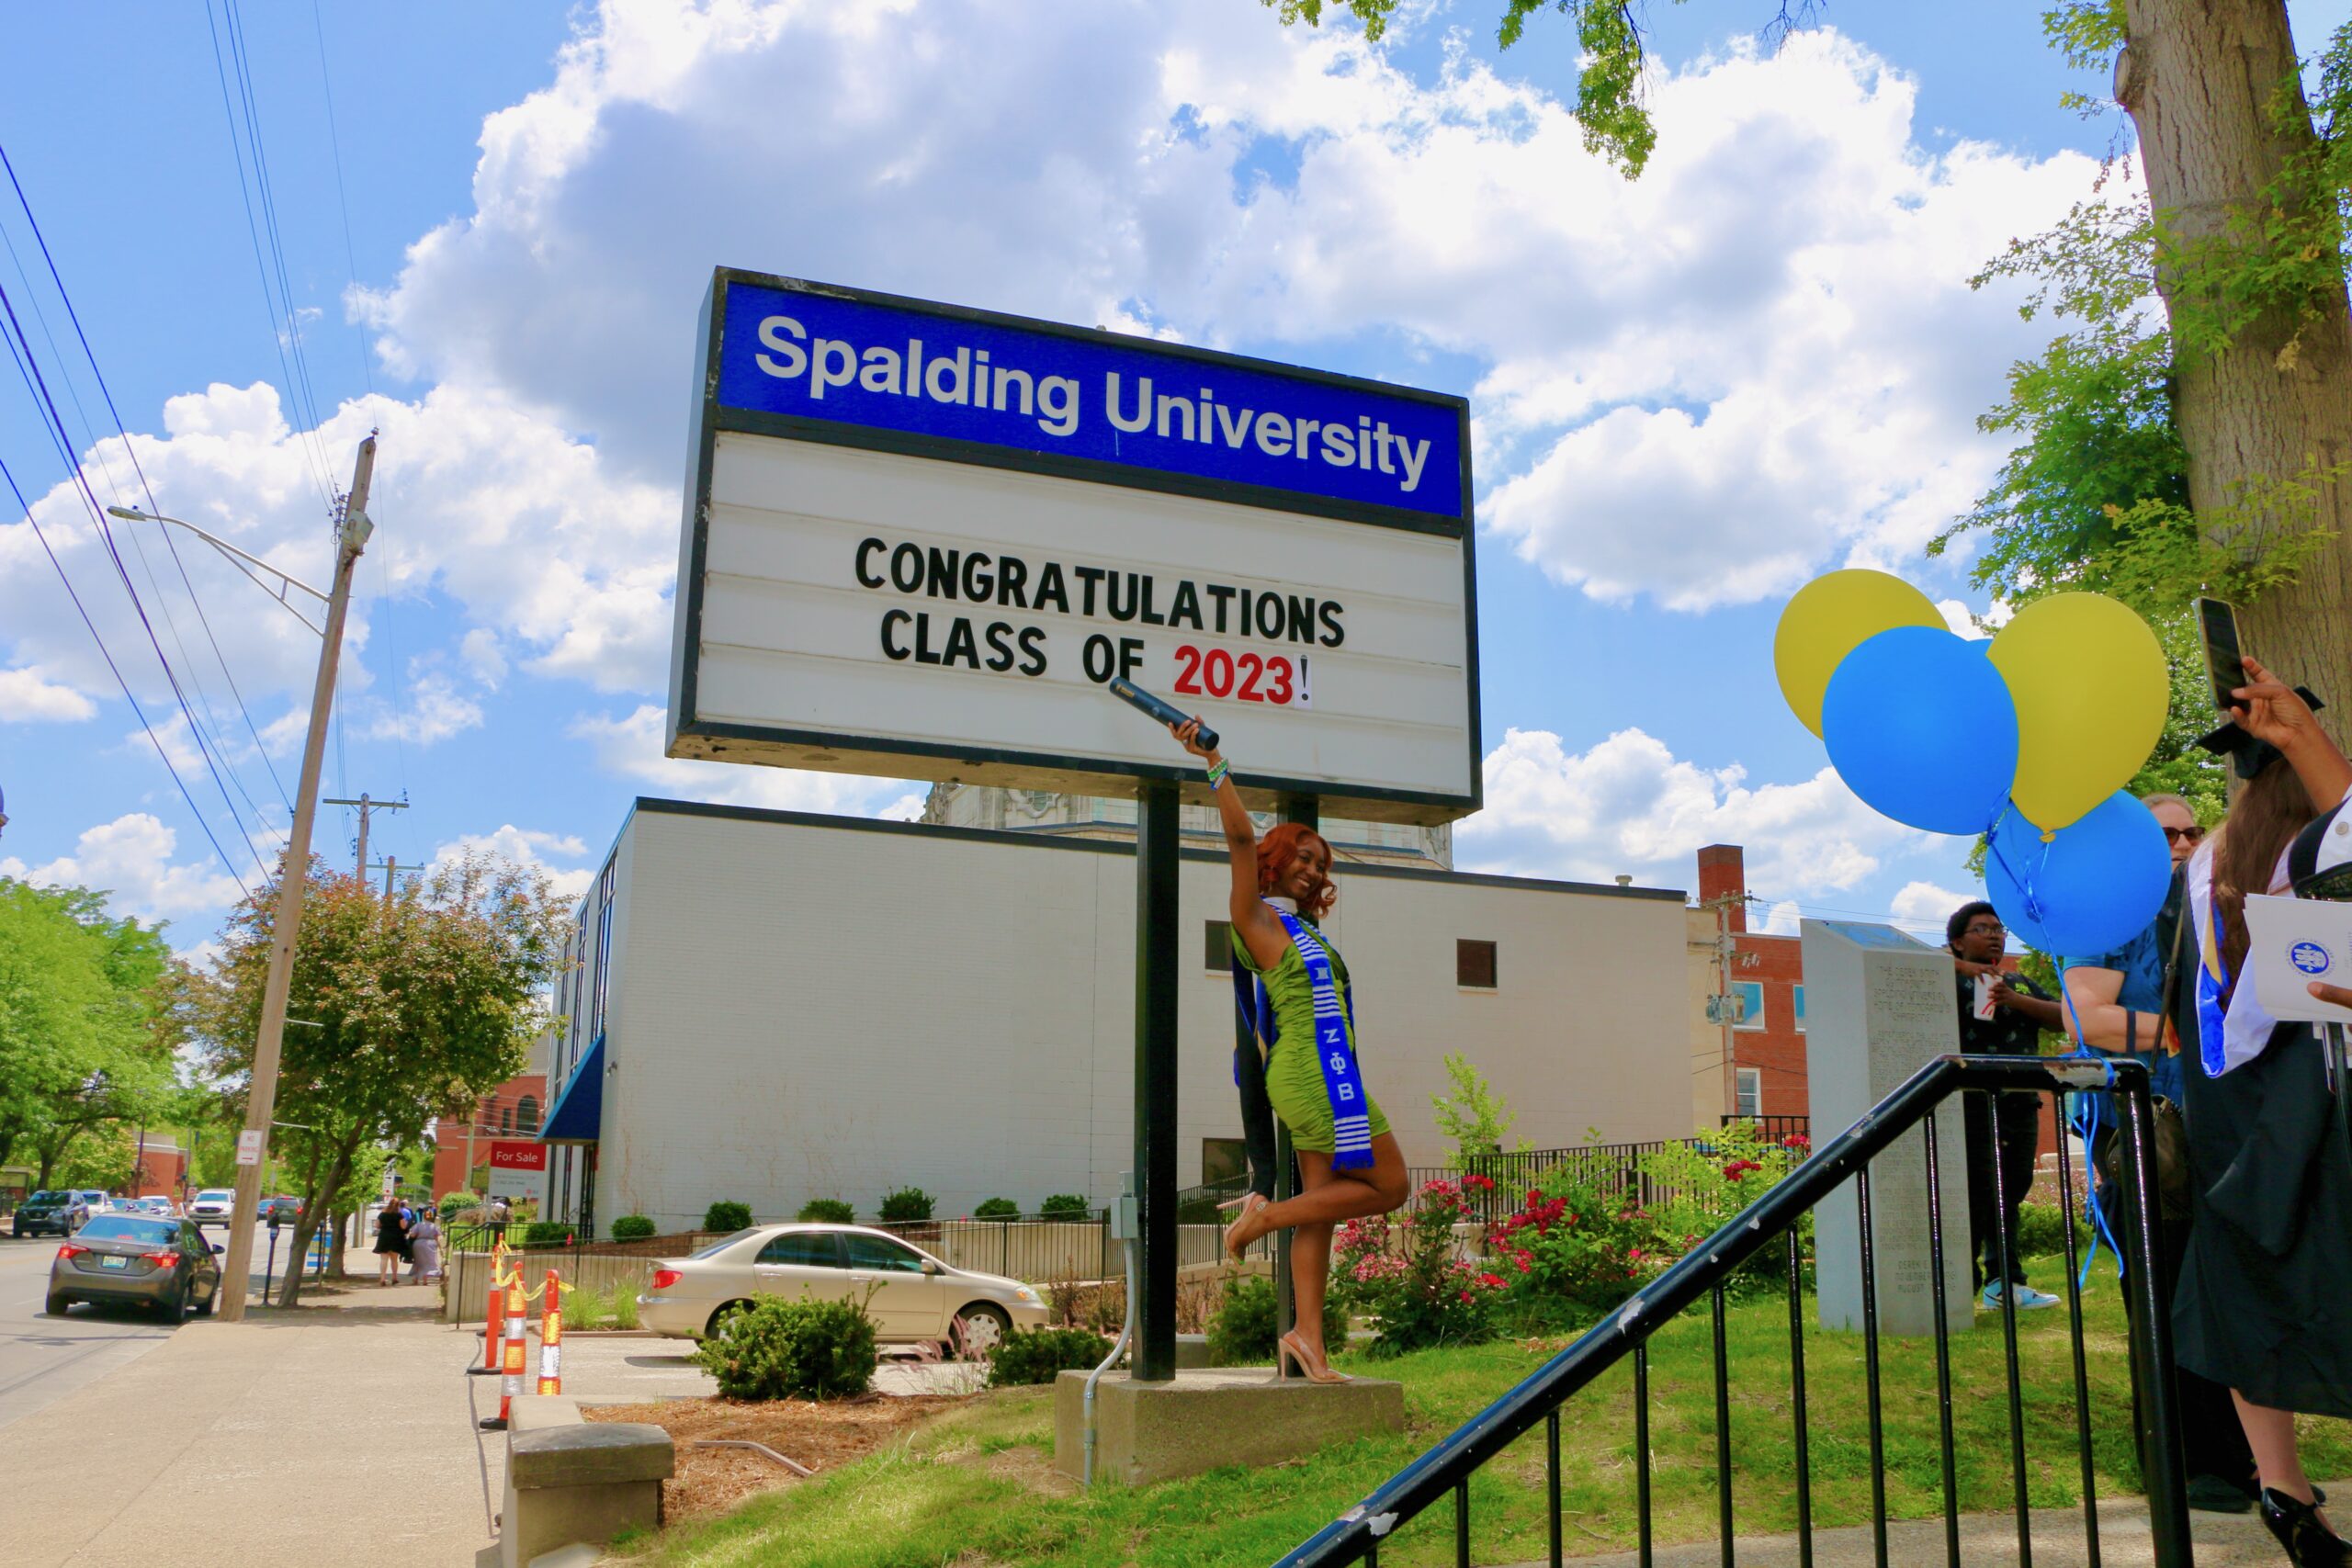 Spalding graduate posing with sign reading "Congratulations Calss of 2023"